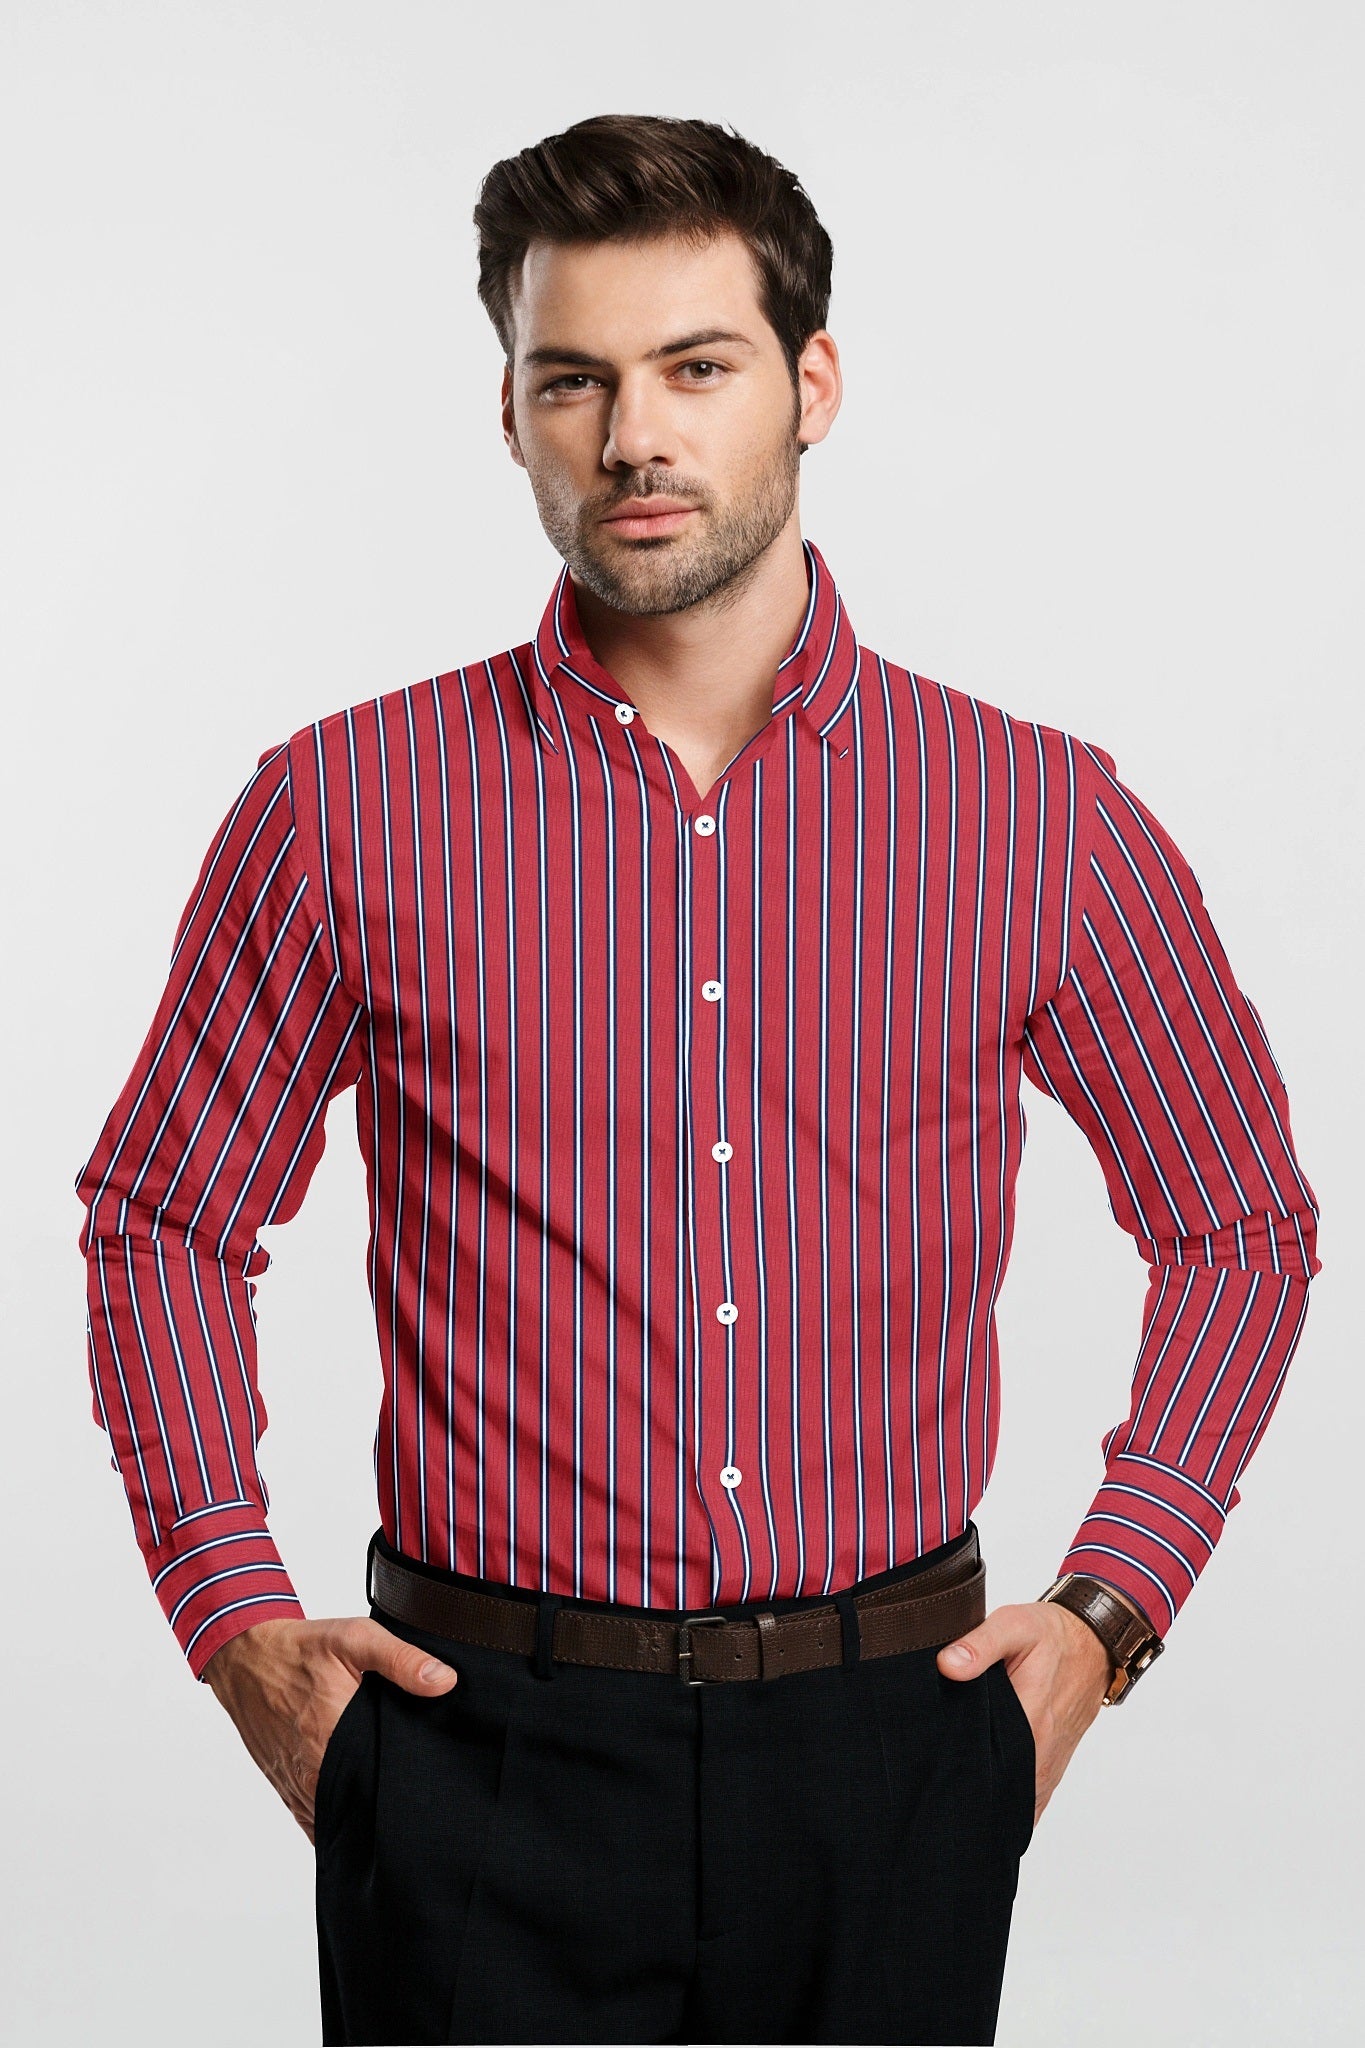 Baroque Rose Red with Peony Blue and White Stripes Cotton Shirt